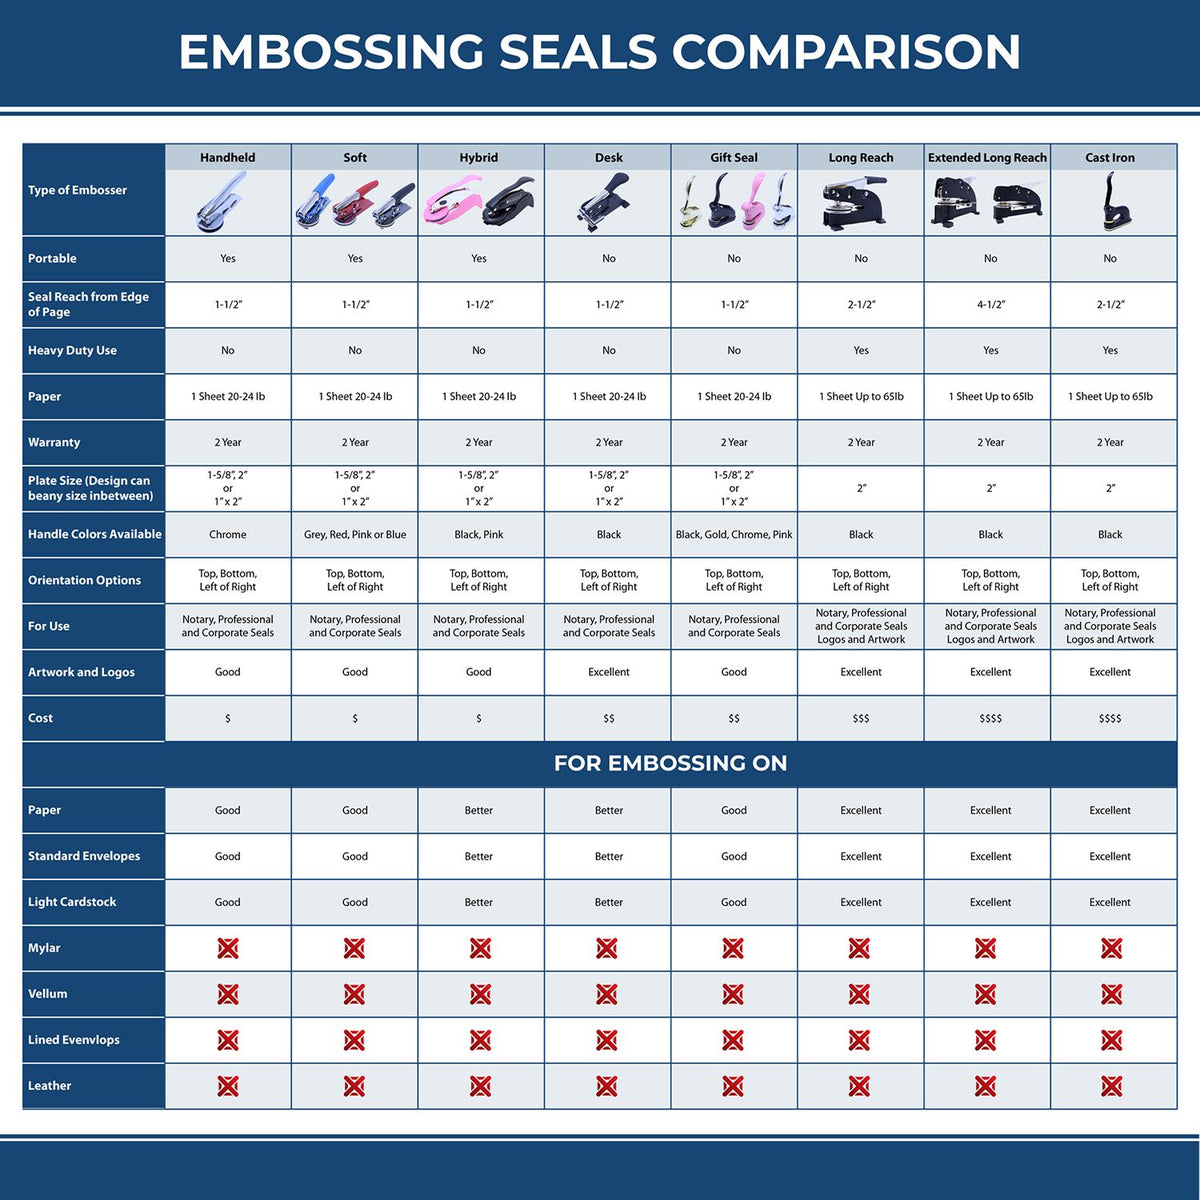 A comparison chart for the different types of mount models available for the Soft Pocket Louisiana Landscape Architect Embosser.